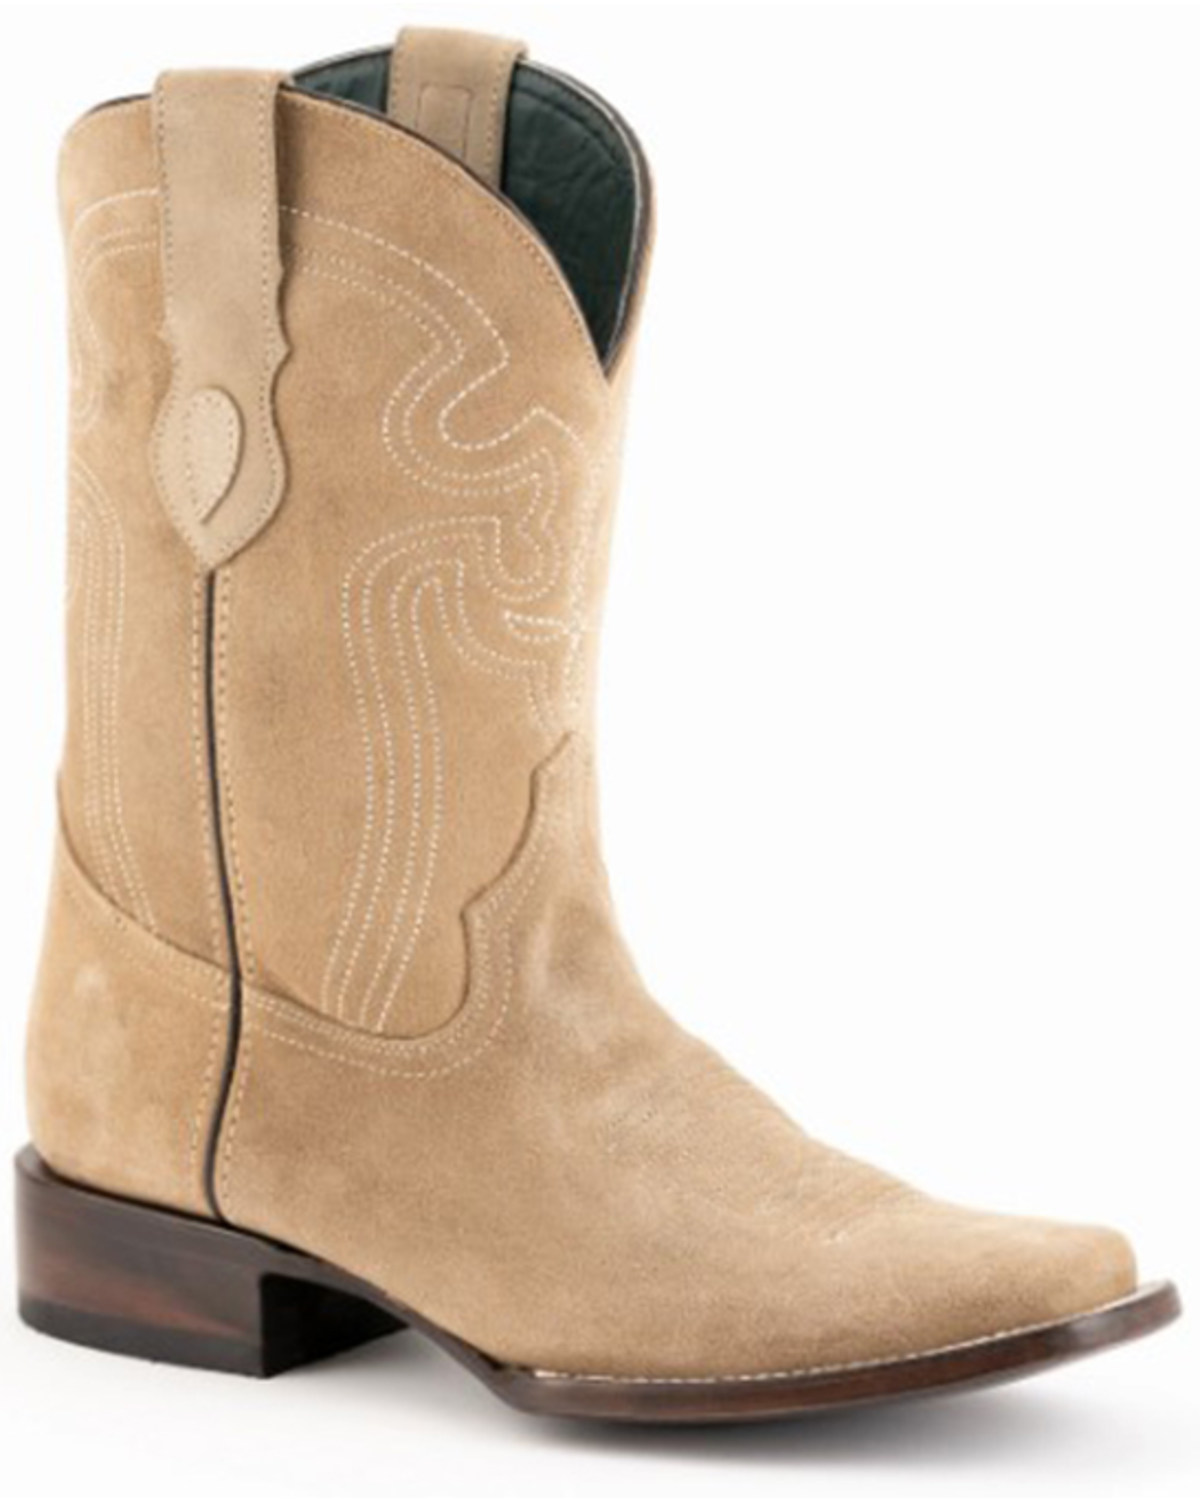 Ferrini Men's Roughrider Roughout Western Boots - Square Toe